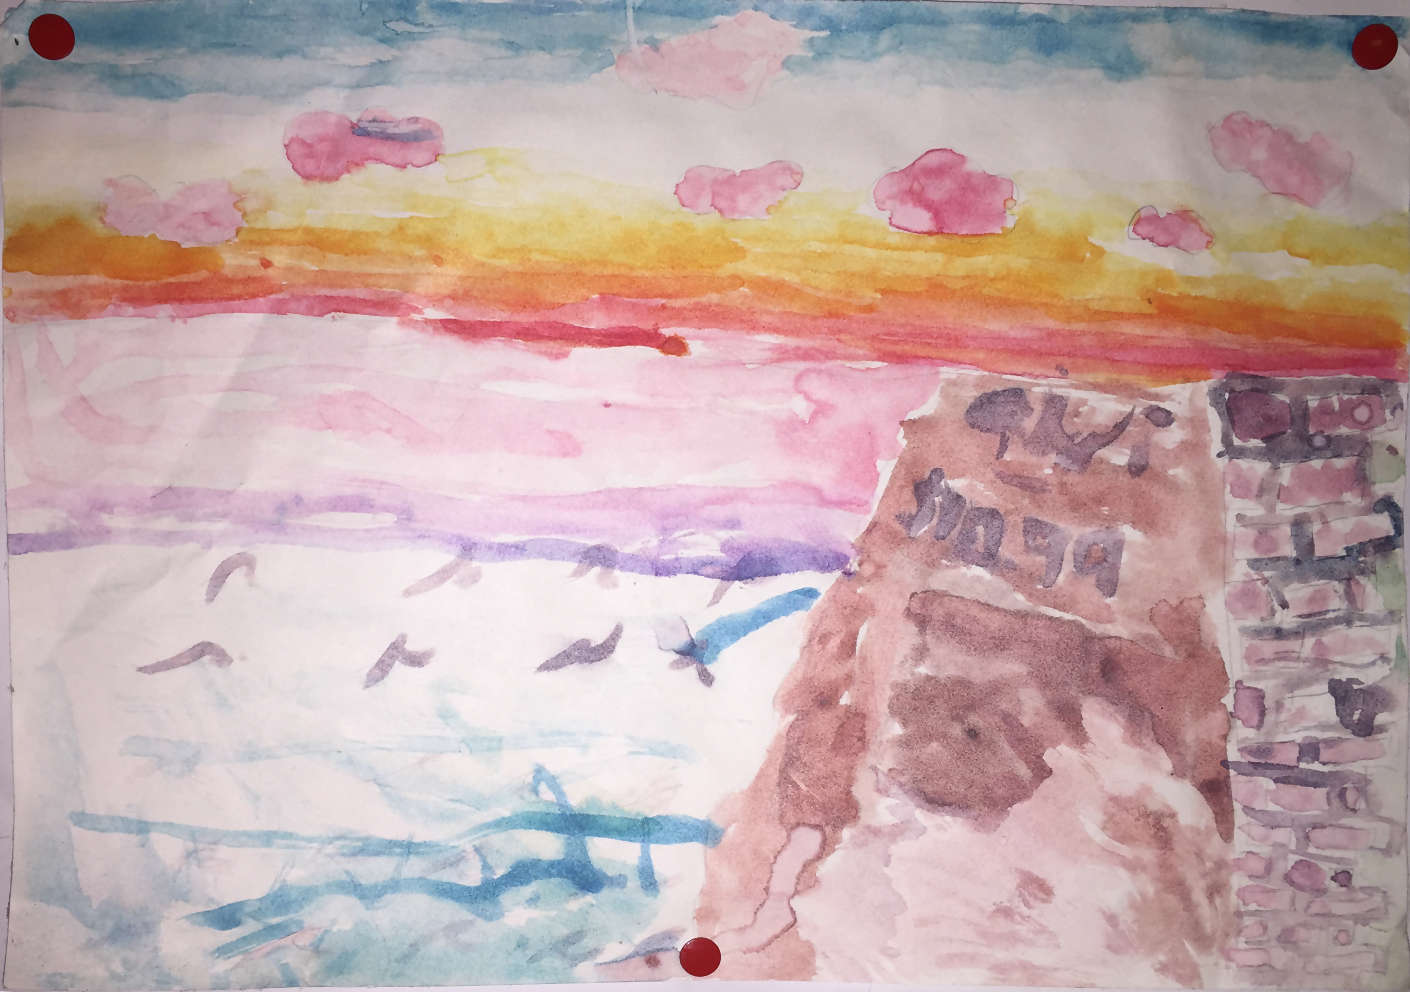 Yet another sunset.  The sky is blue, white, yellow, orange, and red; there are pink clouds scattered throughout the sky.  Below the sky is some water, which is pink and purple on the top and then blue-green on the bottom, with some waves in the middle.  On the right is a beach, and to the right of that is a brick wall.  On the beach it says, "Chri" and "$10.99"